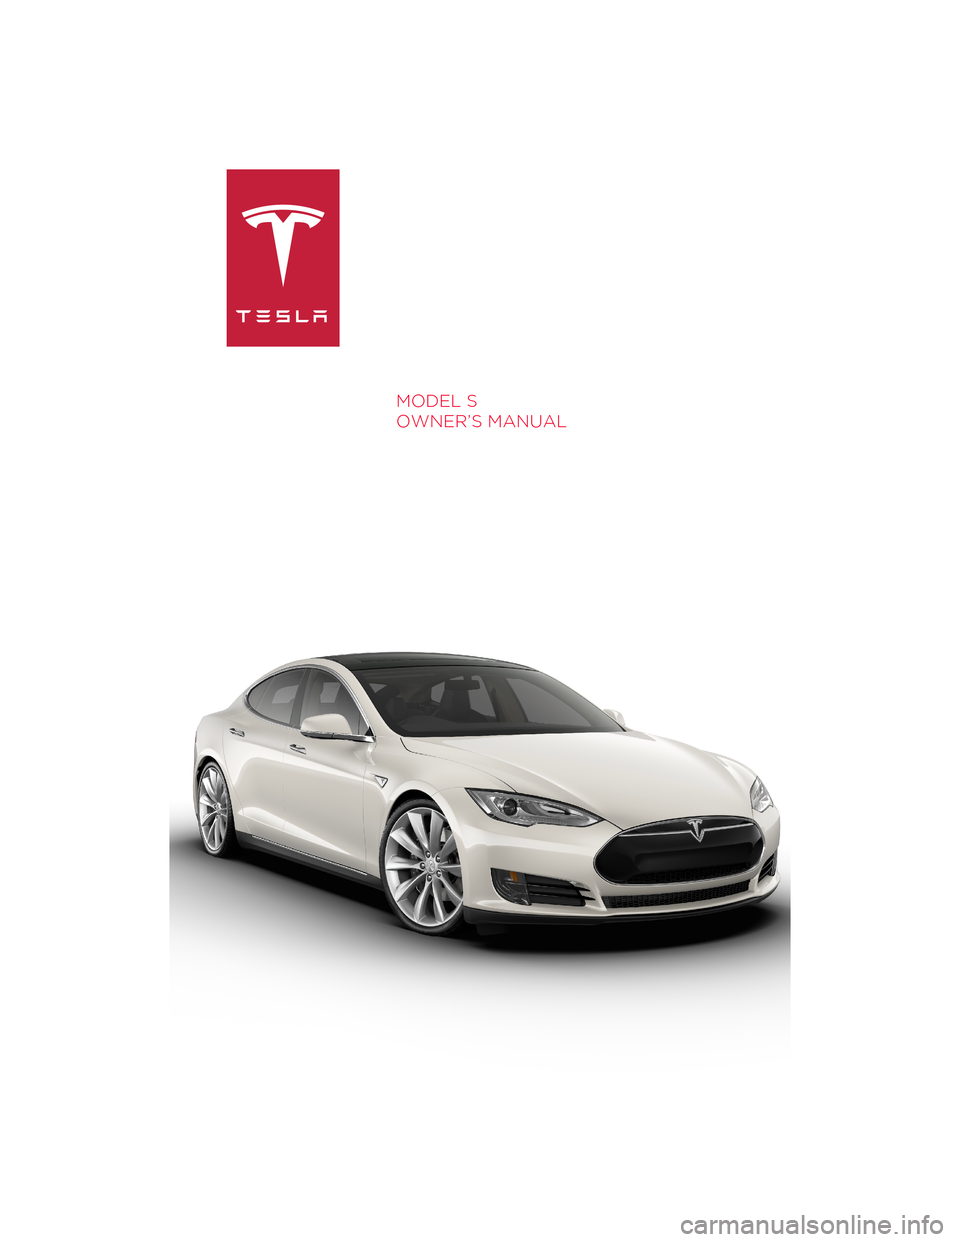 TESLA MODEL S 2014  Owners manual (Europe) MODEL S
OWNER’S MANUAL
Cover.fm  Page 2  Friday, July 19, 2013  1:20 PM 